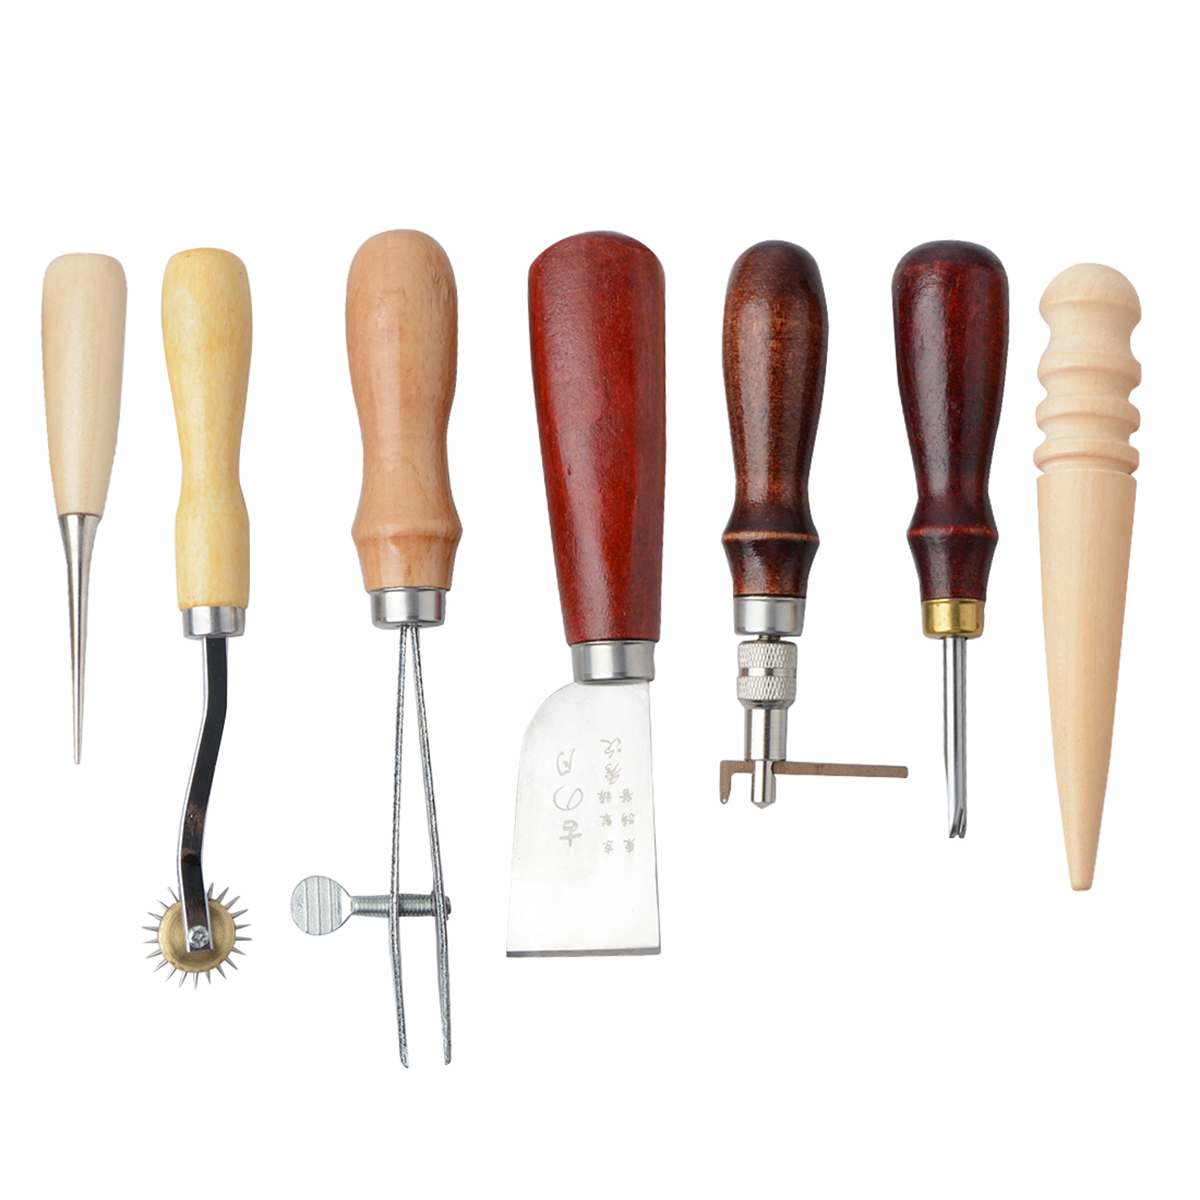 

7pcs Leather Craft DIY Punch Tools Kit Stitching Carving Sewing Saddle Groover